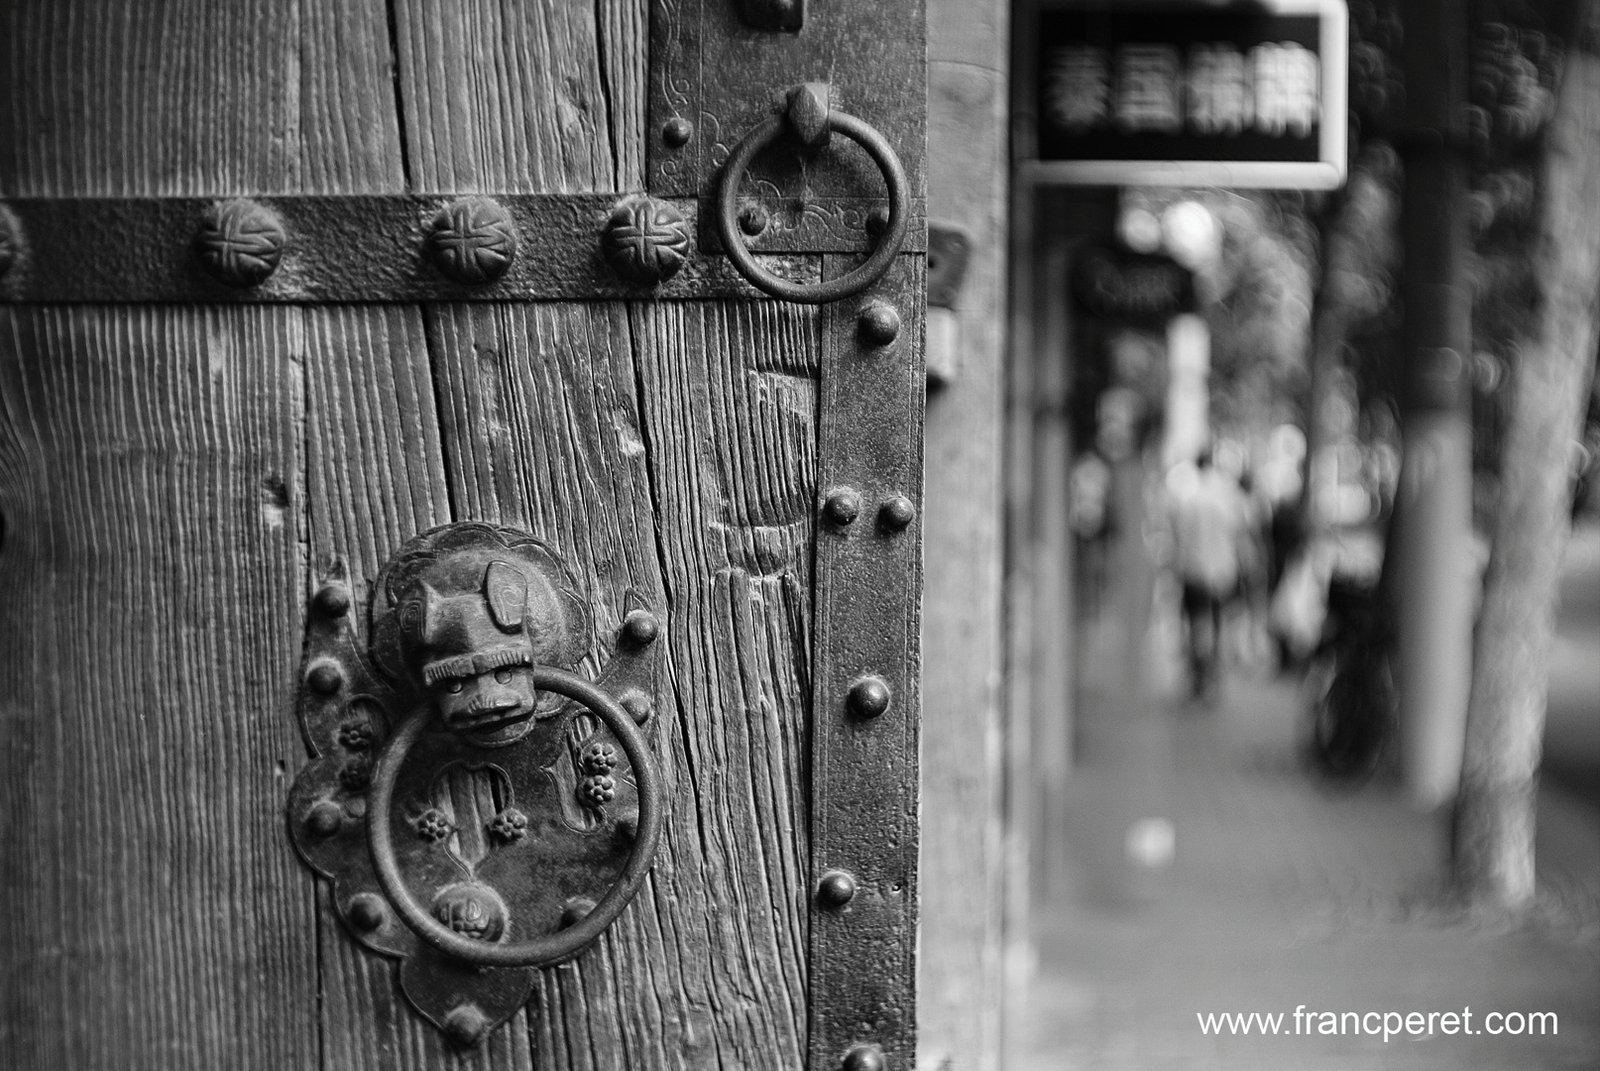 Architecture is another great topic for street photography in Shanghai